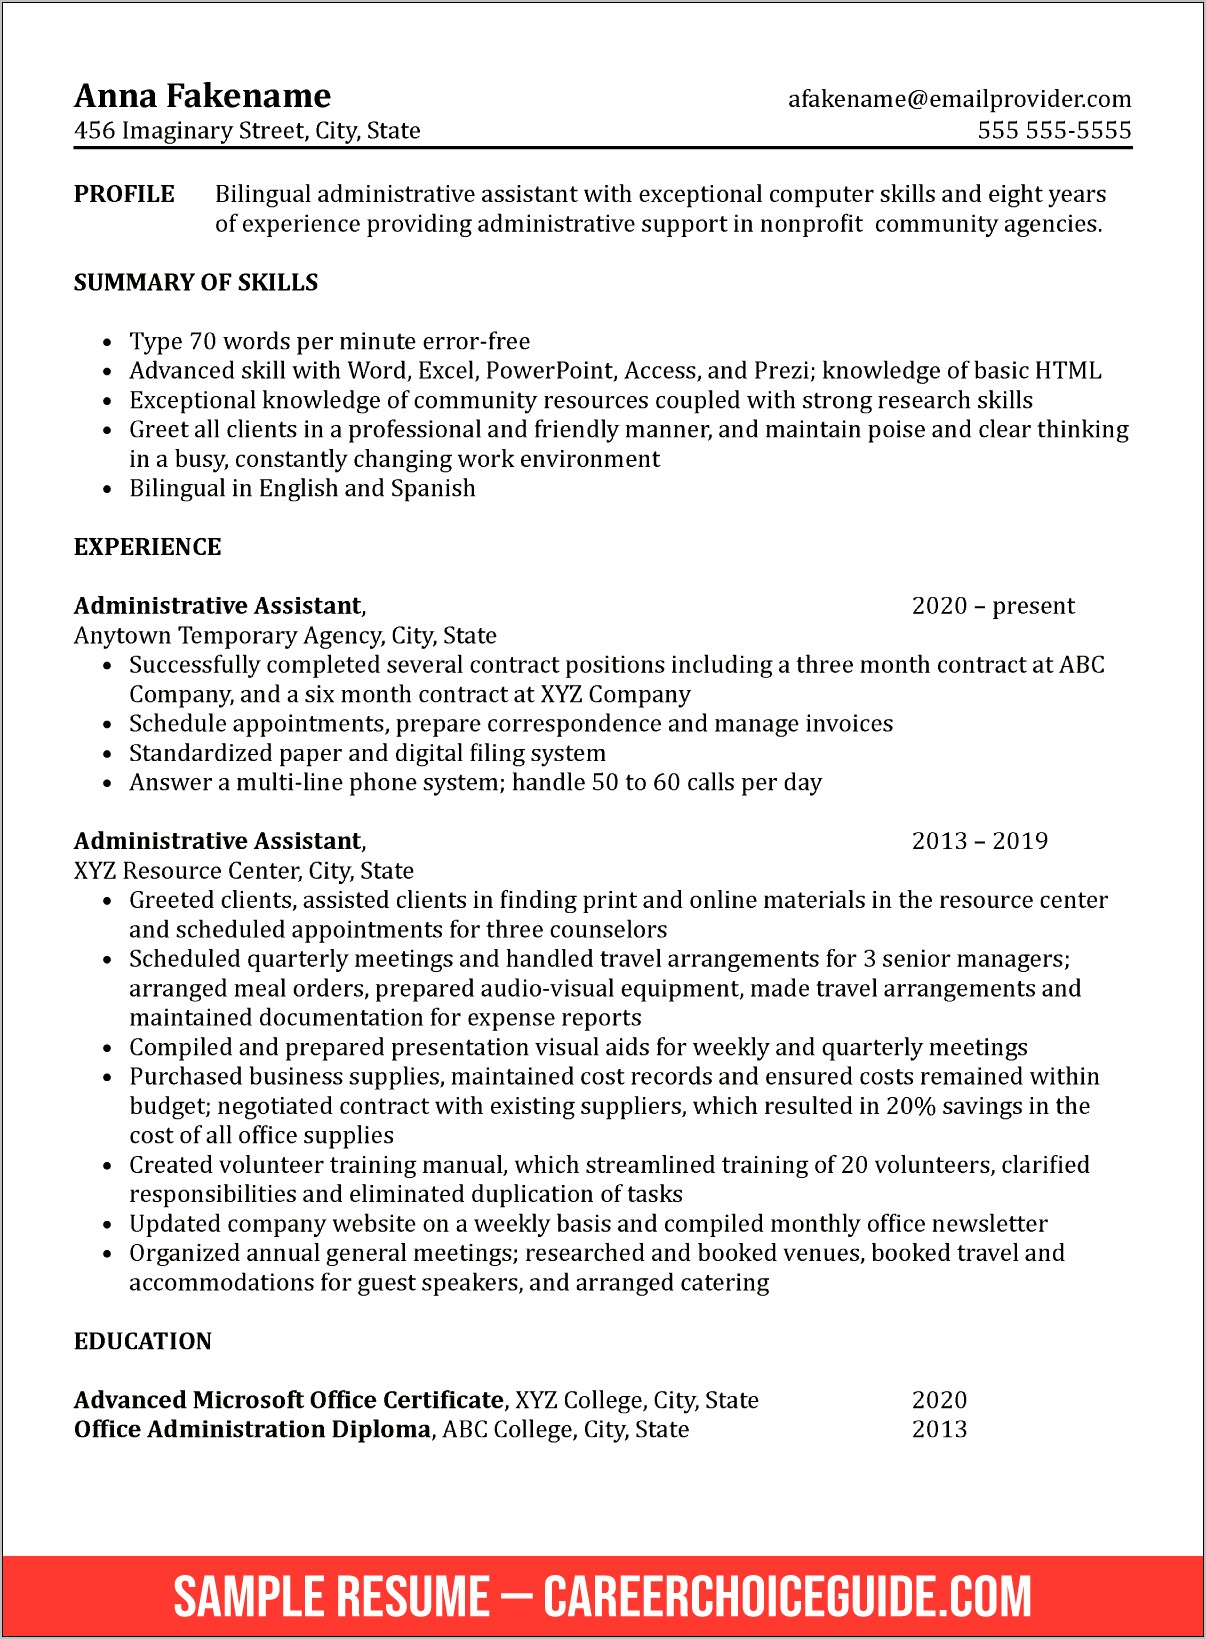 Executive Summary For Office Assistant Resume